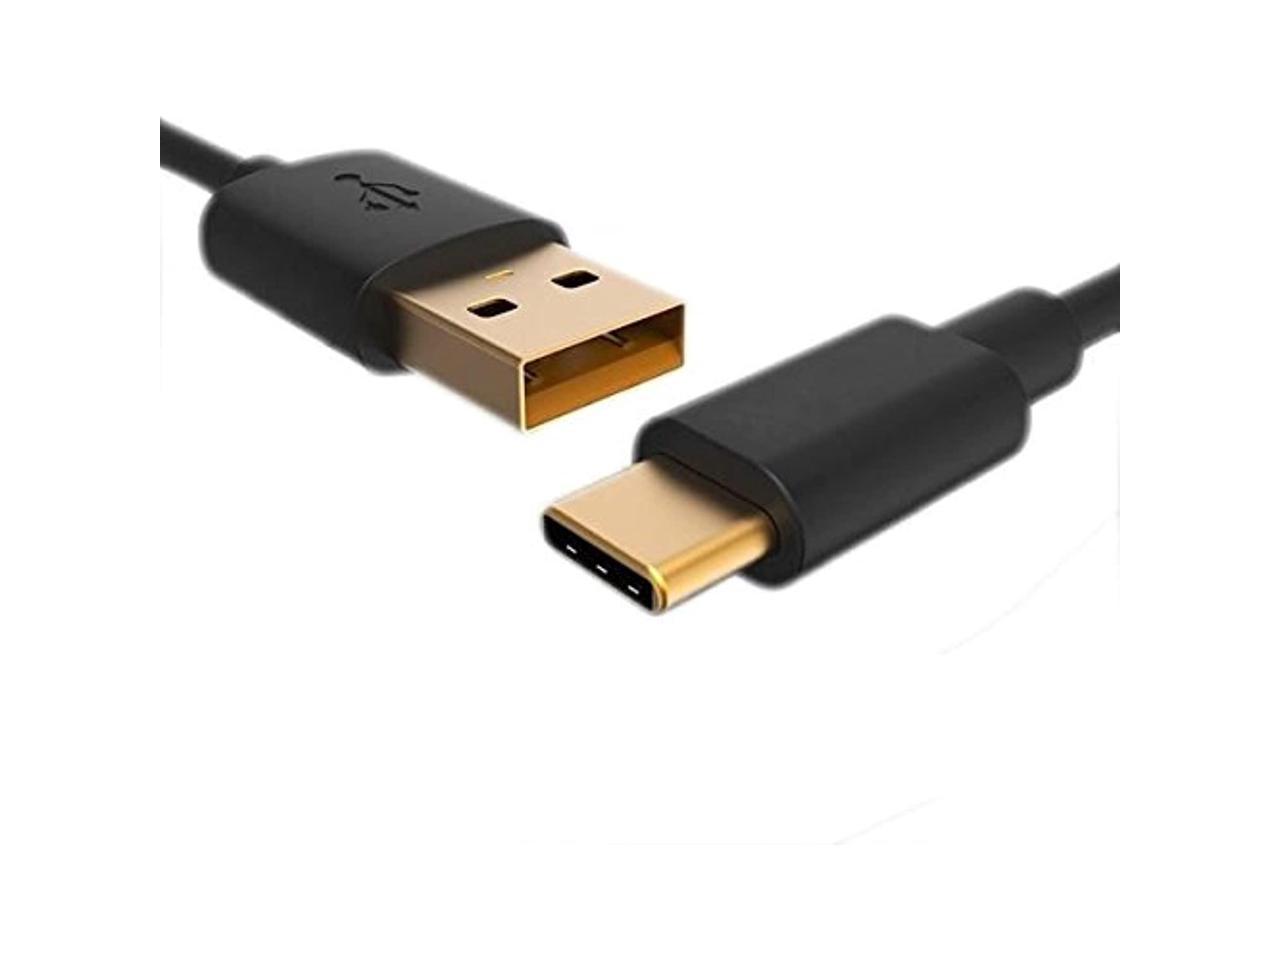 OMNIHIL 30 Feet Long High Speed USB 2.0 Cable Compatible with Zoom U-44